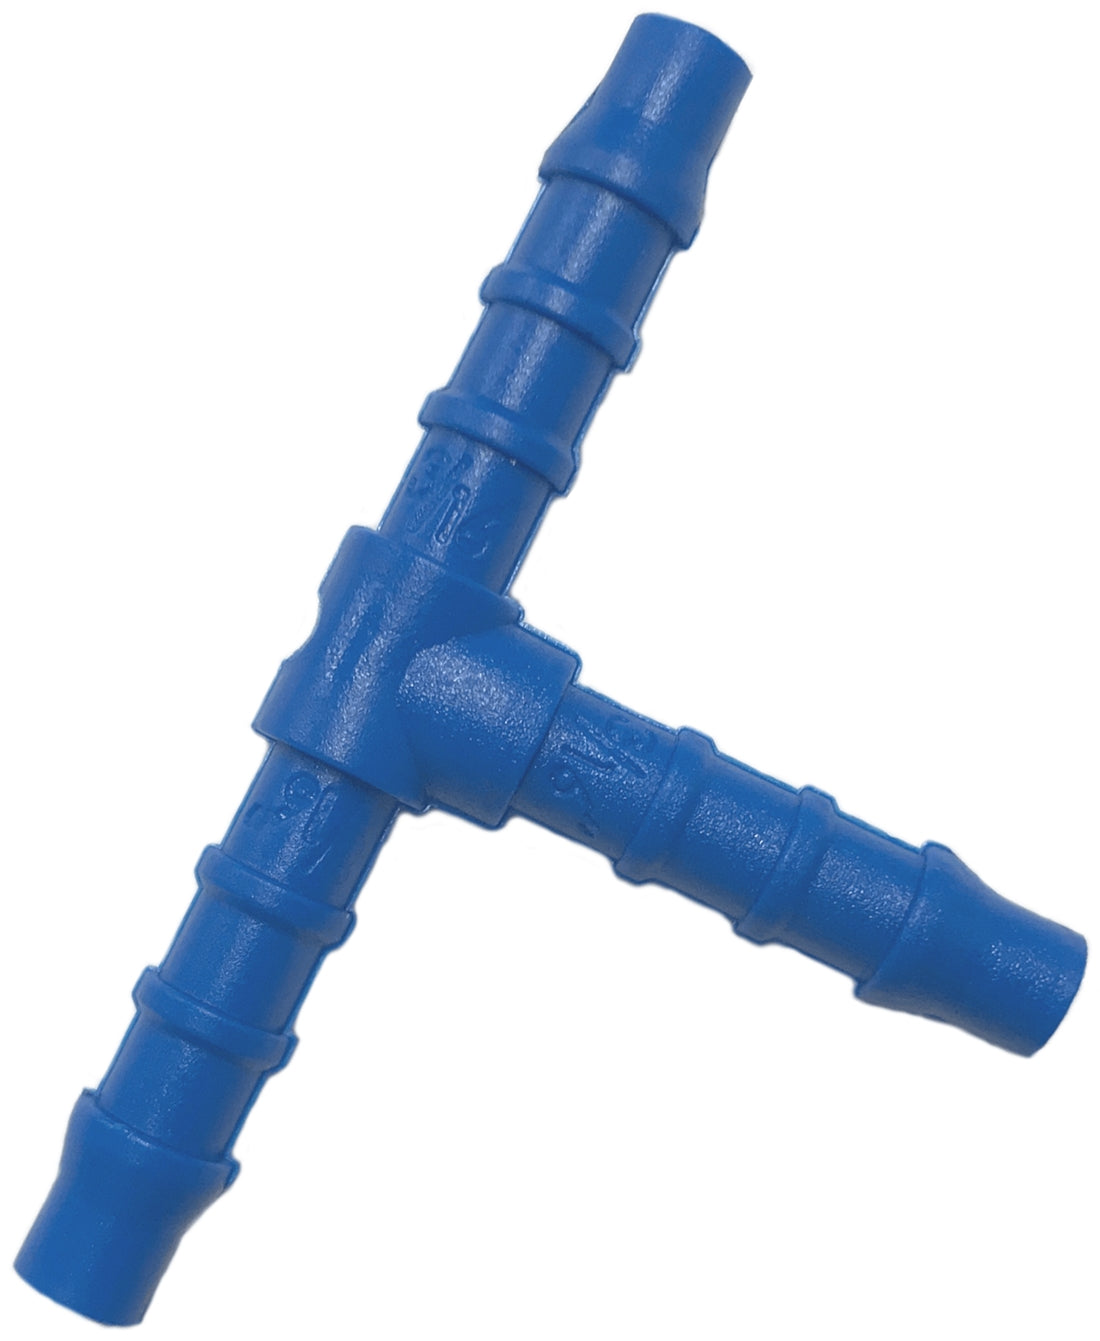 BEC - Tee Pipe Connector for 6mm Bore Tubing - Buy Online SPR Centre UK